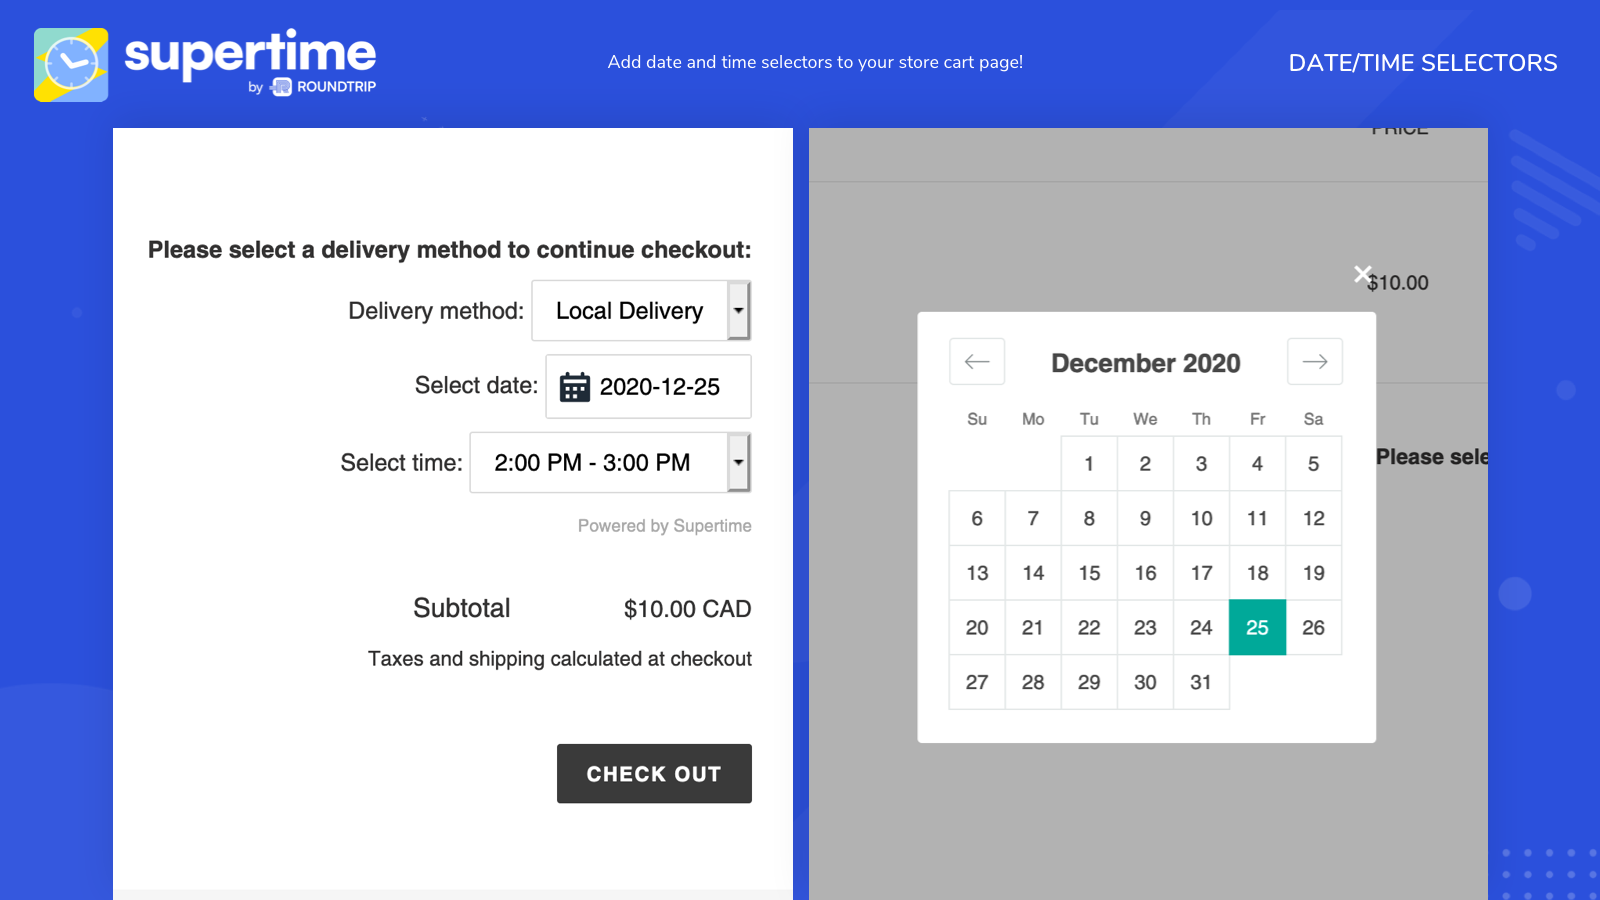 Add delivery date and time selectors to your store cart page!